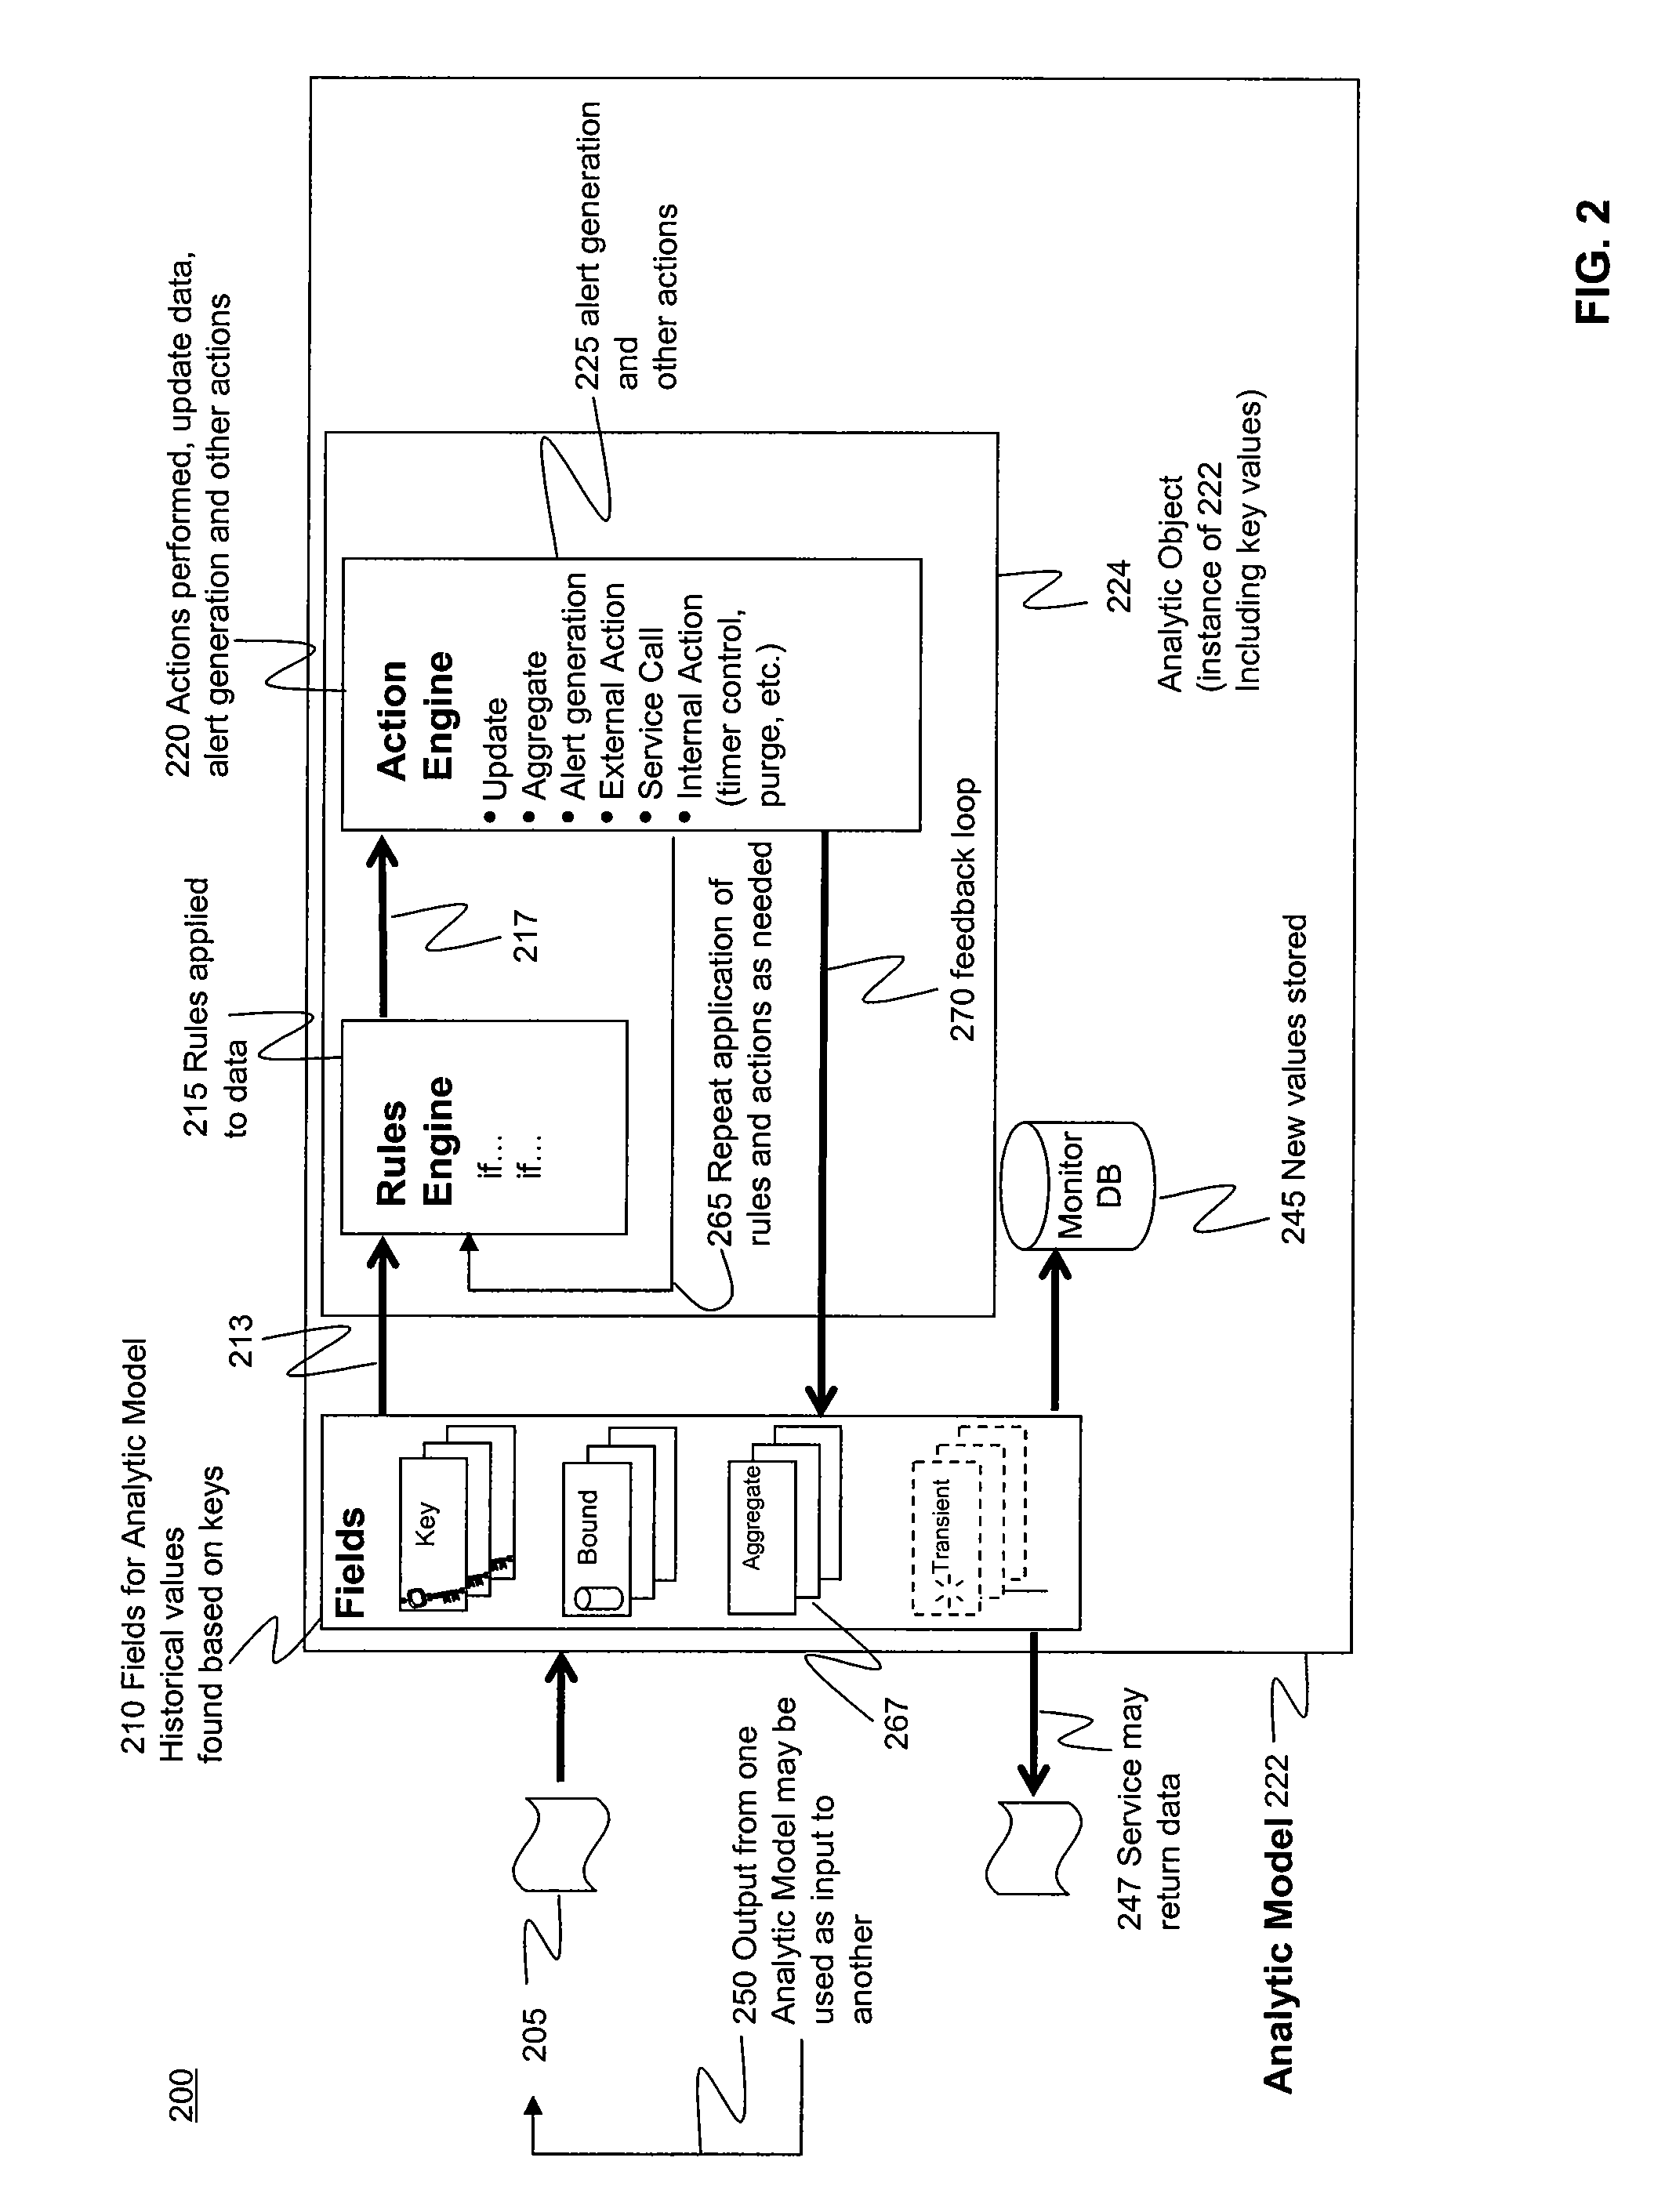 Analytic Model and Systems for Business Activity Monitoring